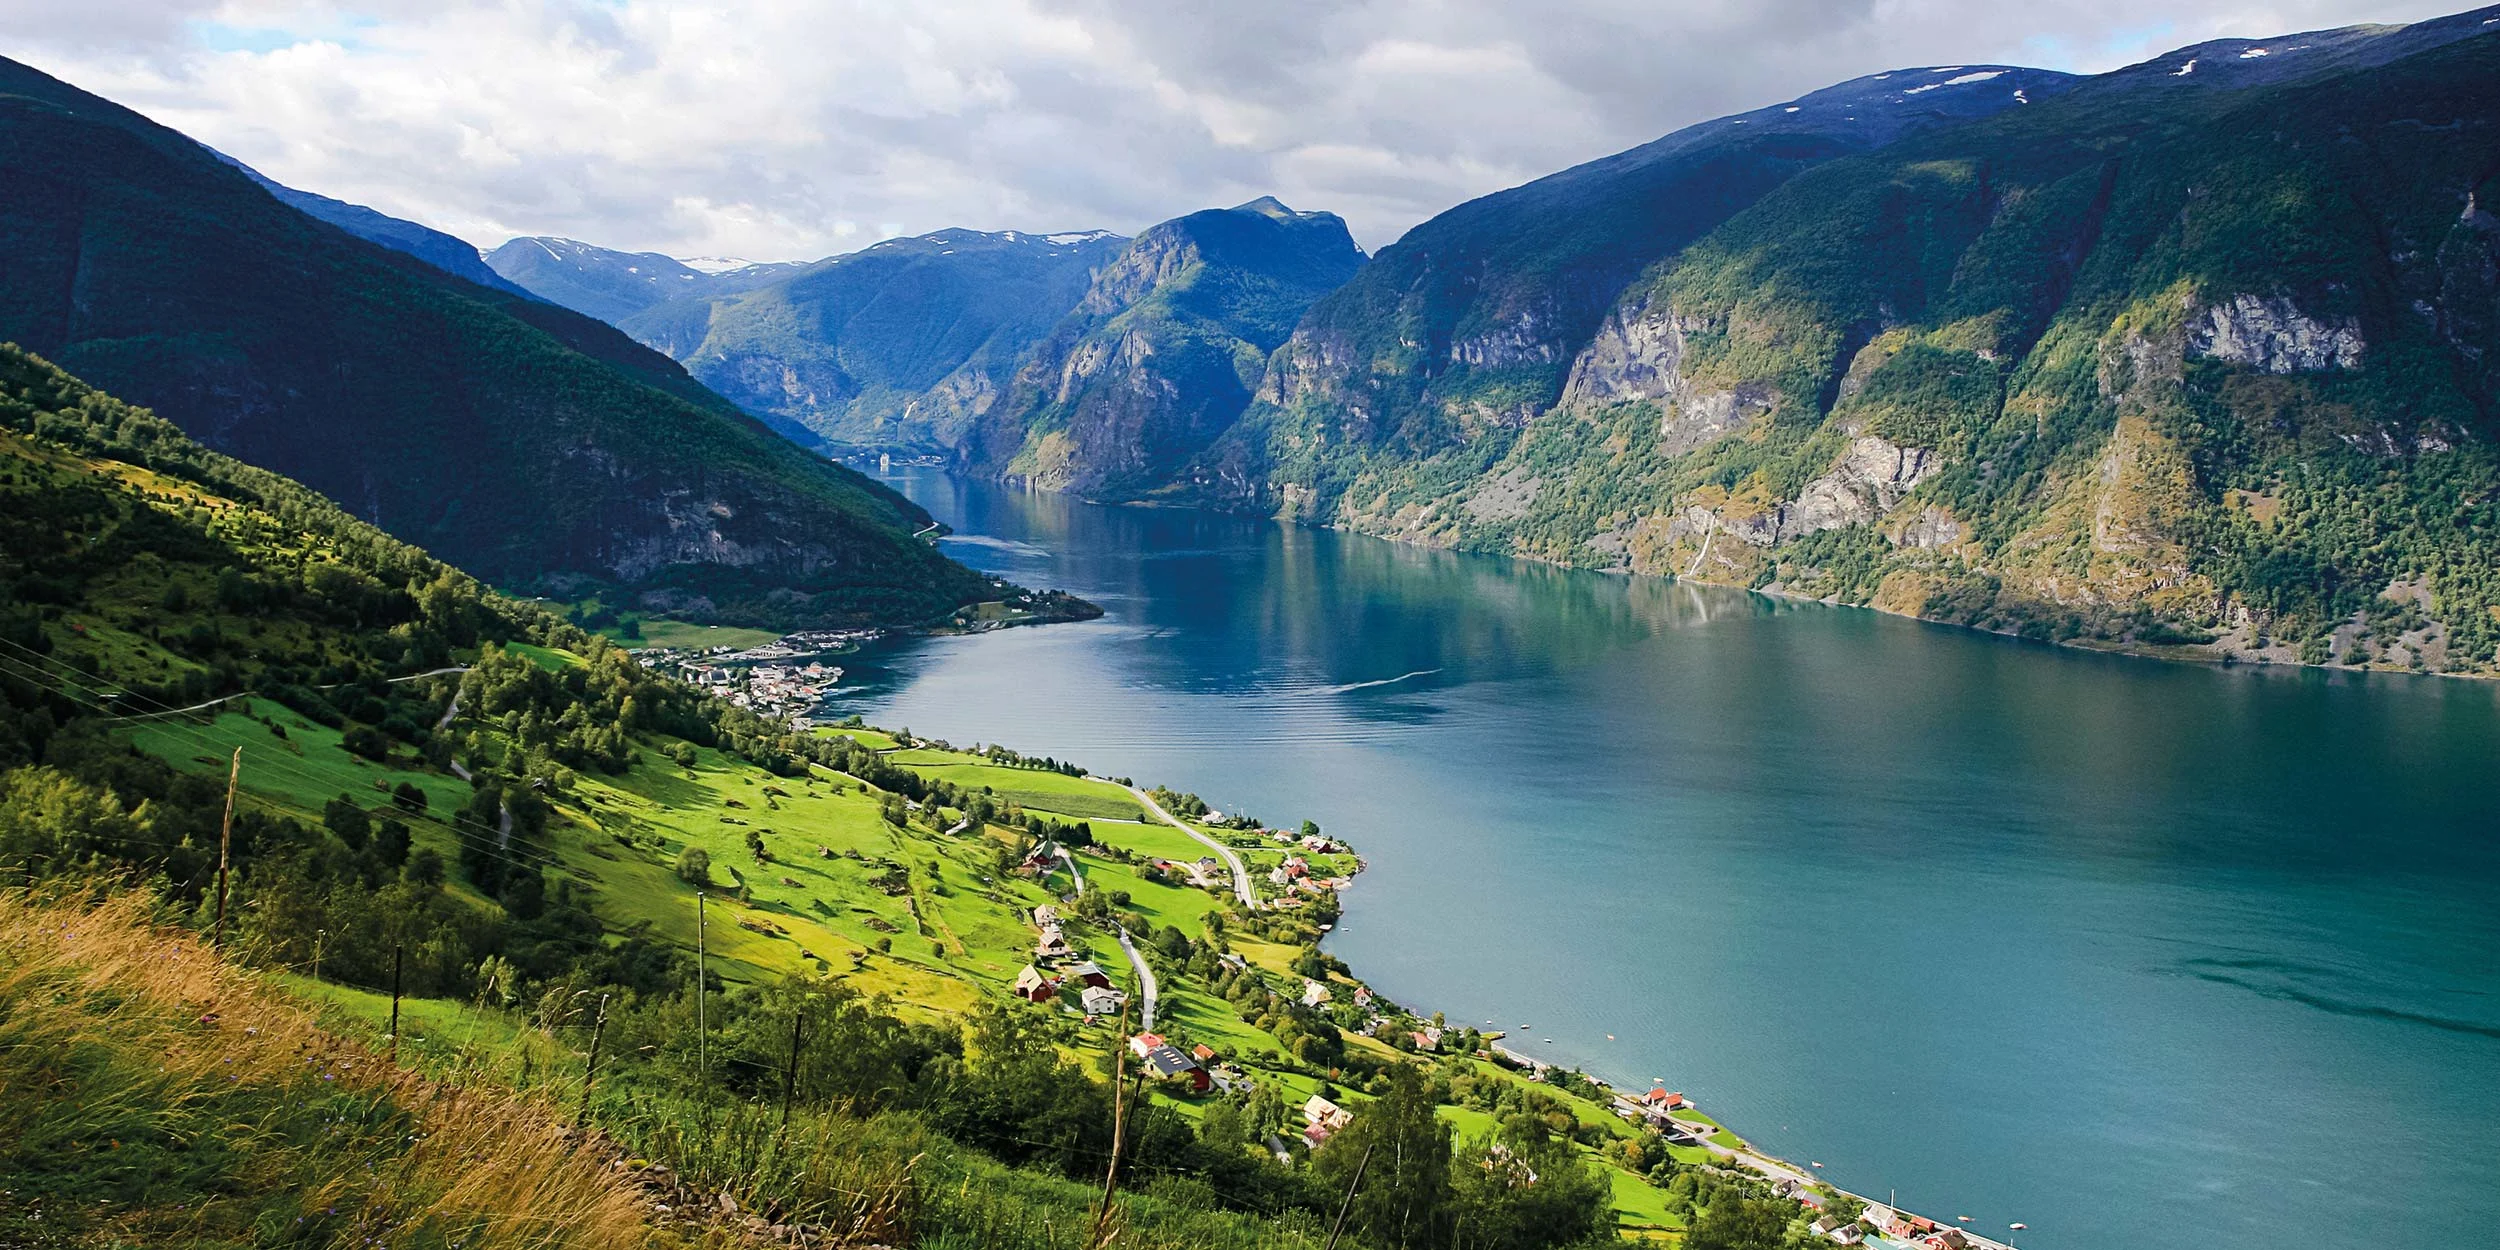 istock 000013489340large sognefjord 2500x1250